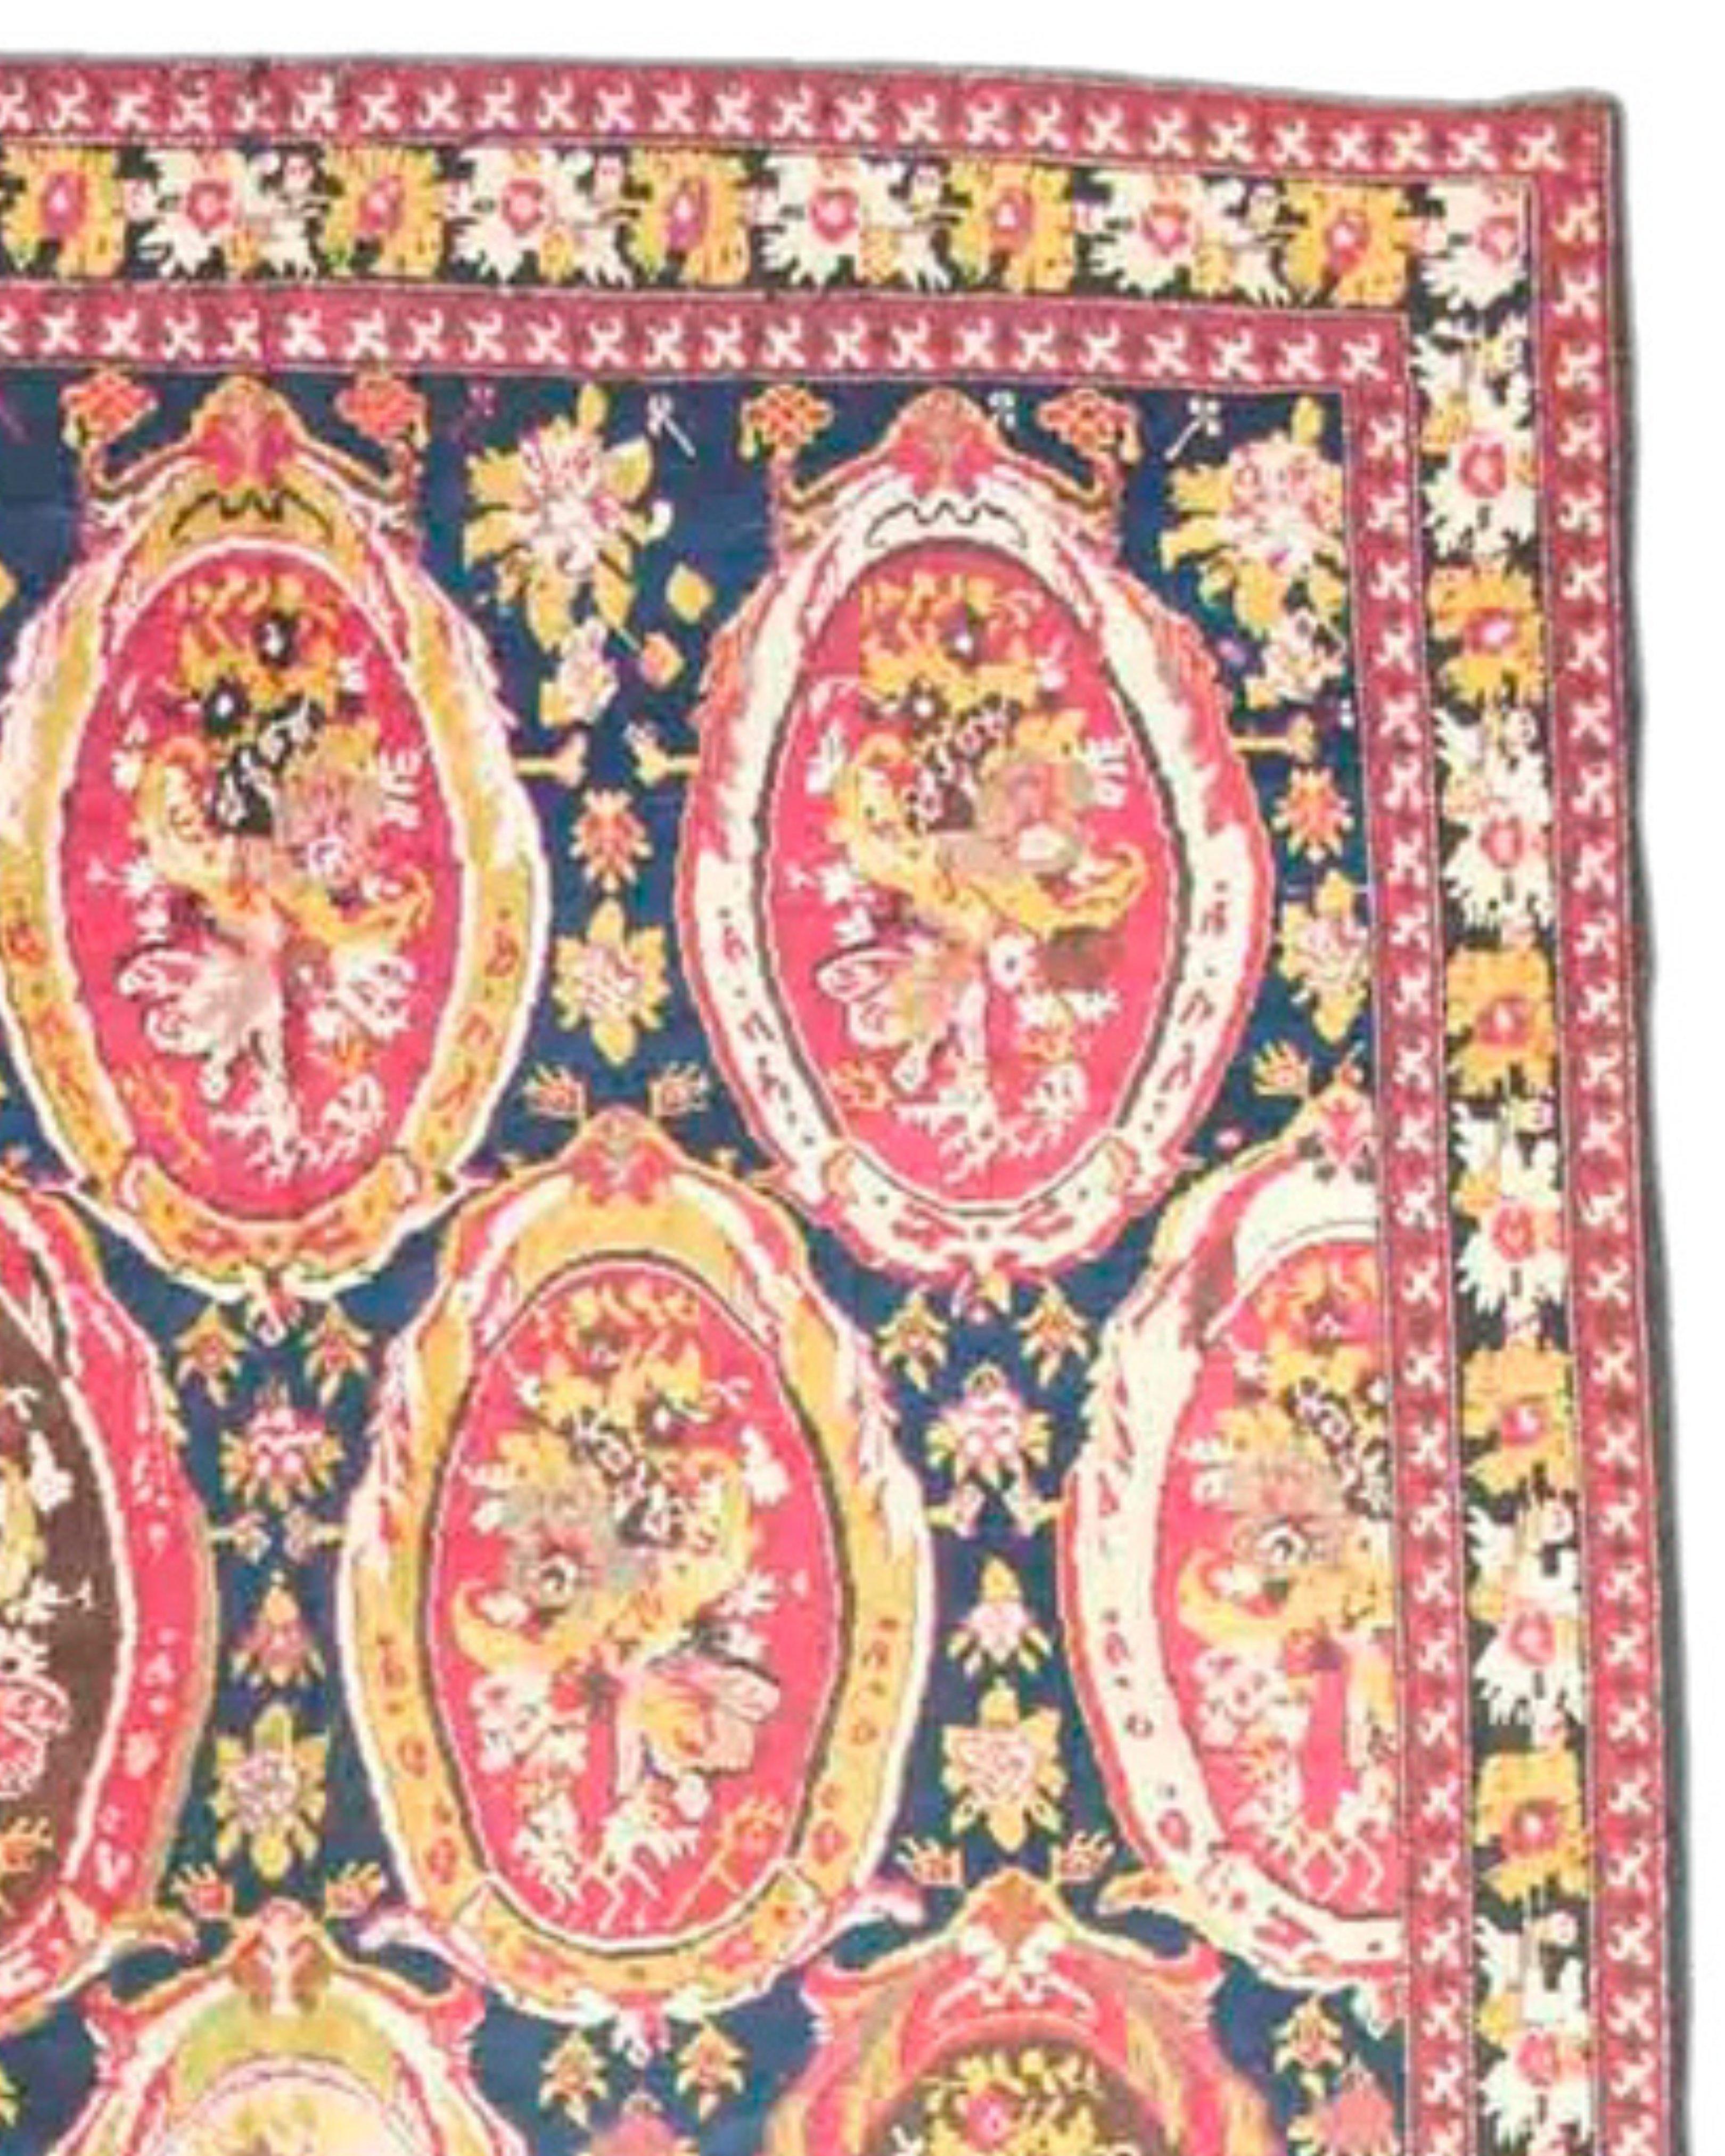 Antique Caucasian Karabagh Long Rug, Late 19th Century

This long oversized Karabagh carpet demonstrates the fascination in the Near East with French design in the late 19th century. Here, a Caucasian weaver has rendered a repeat design of garlands